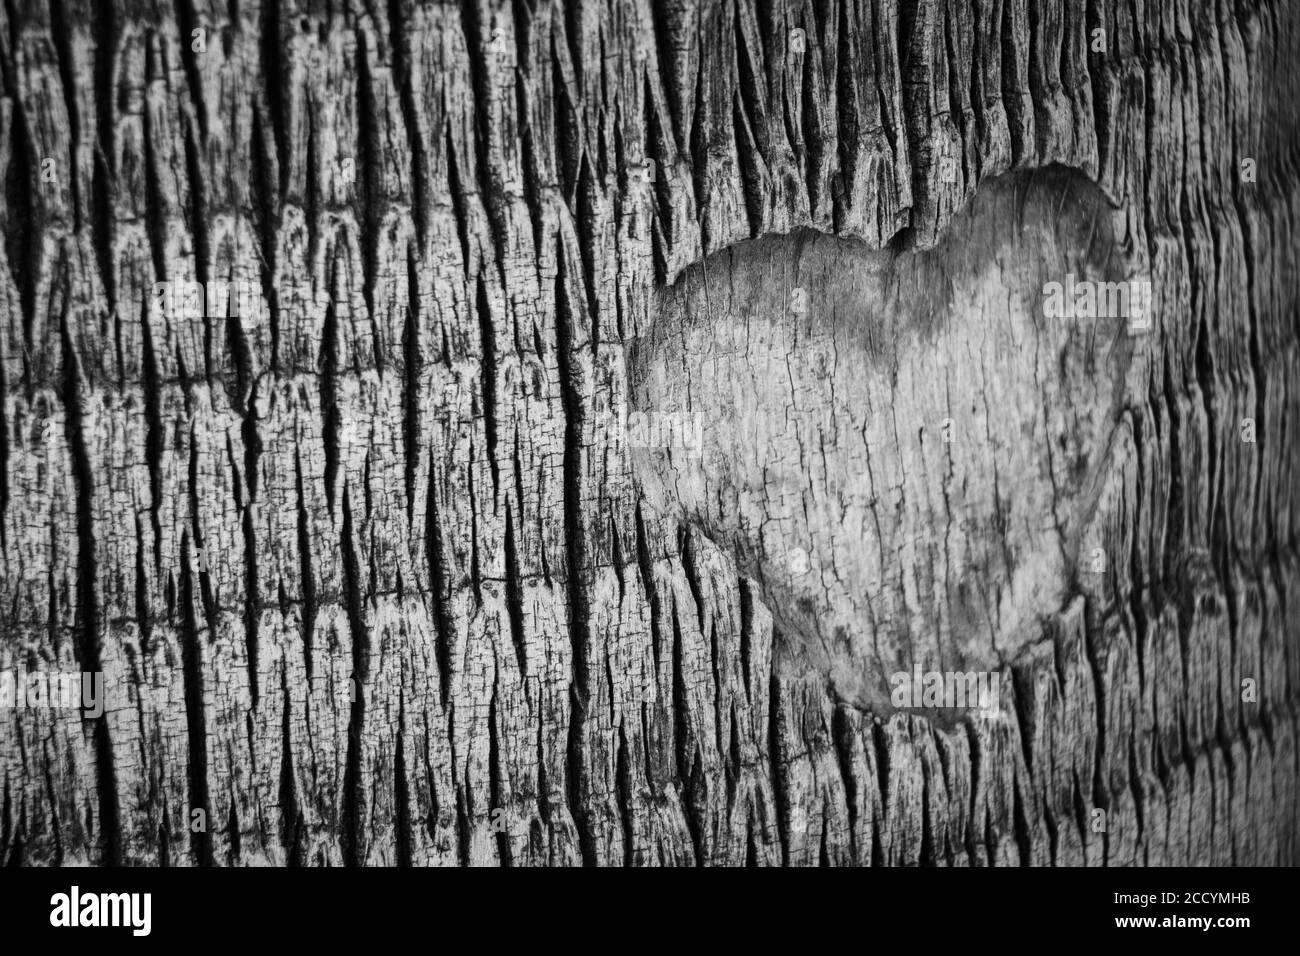 Grayscale shot of a heart shape carved on a bark Stock Photo